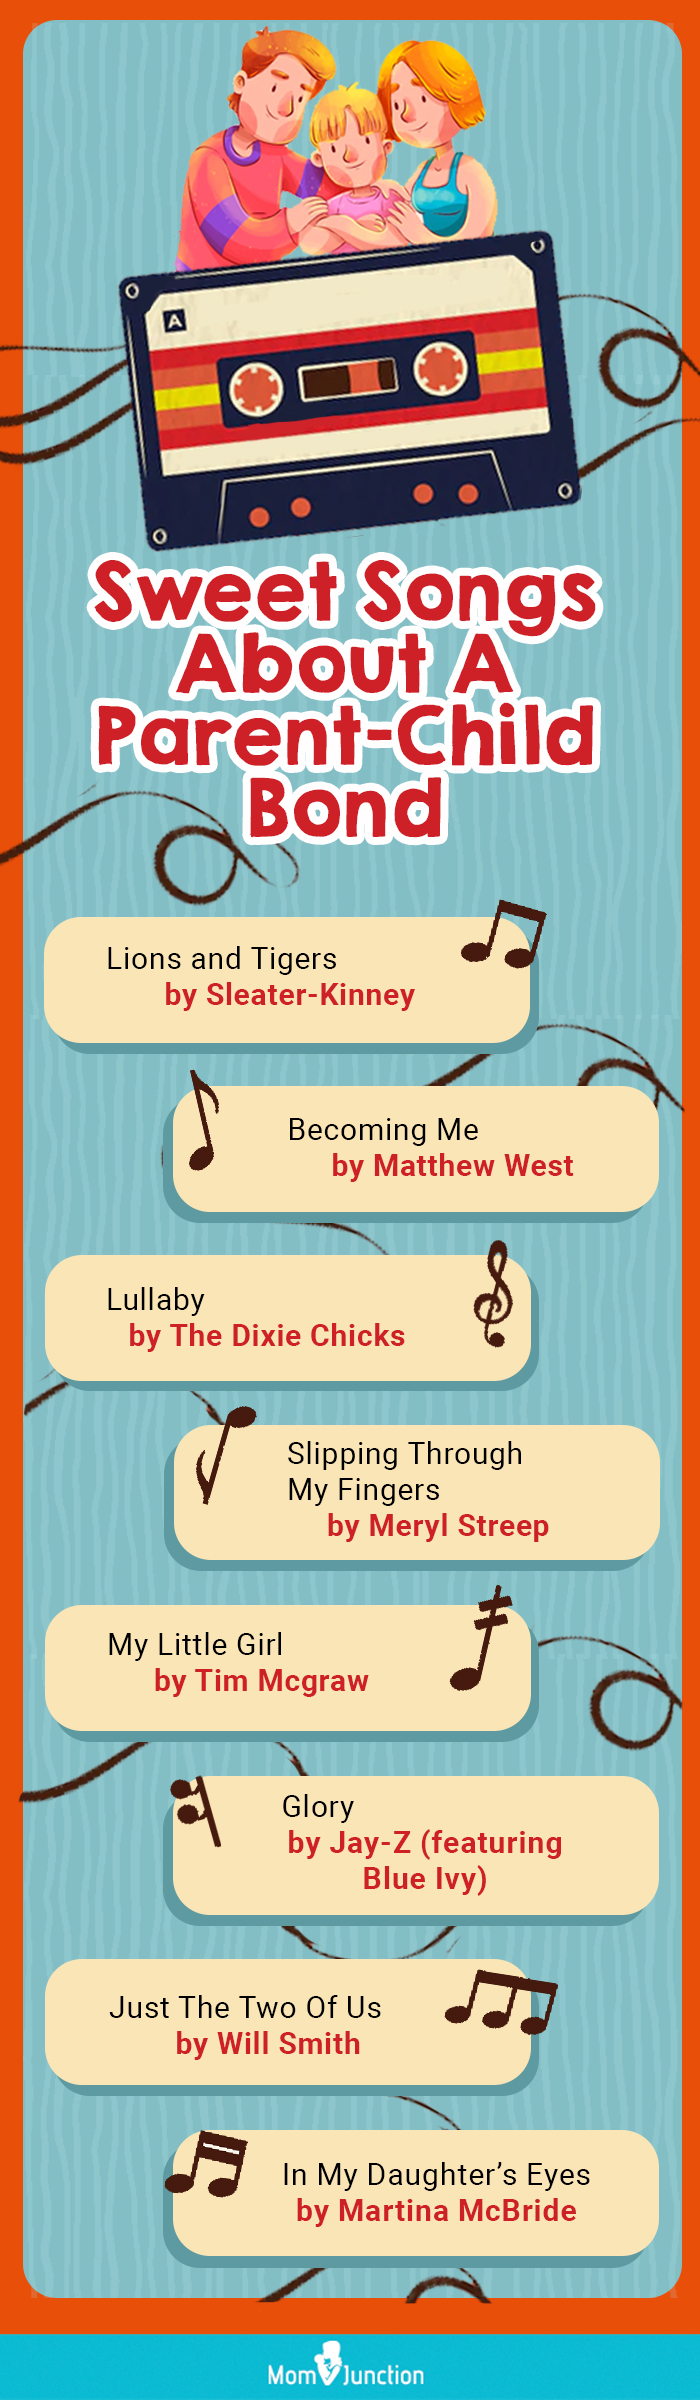 sweet songs about a parent child bond (infographic)